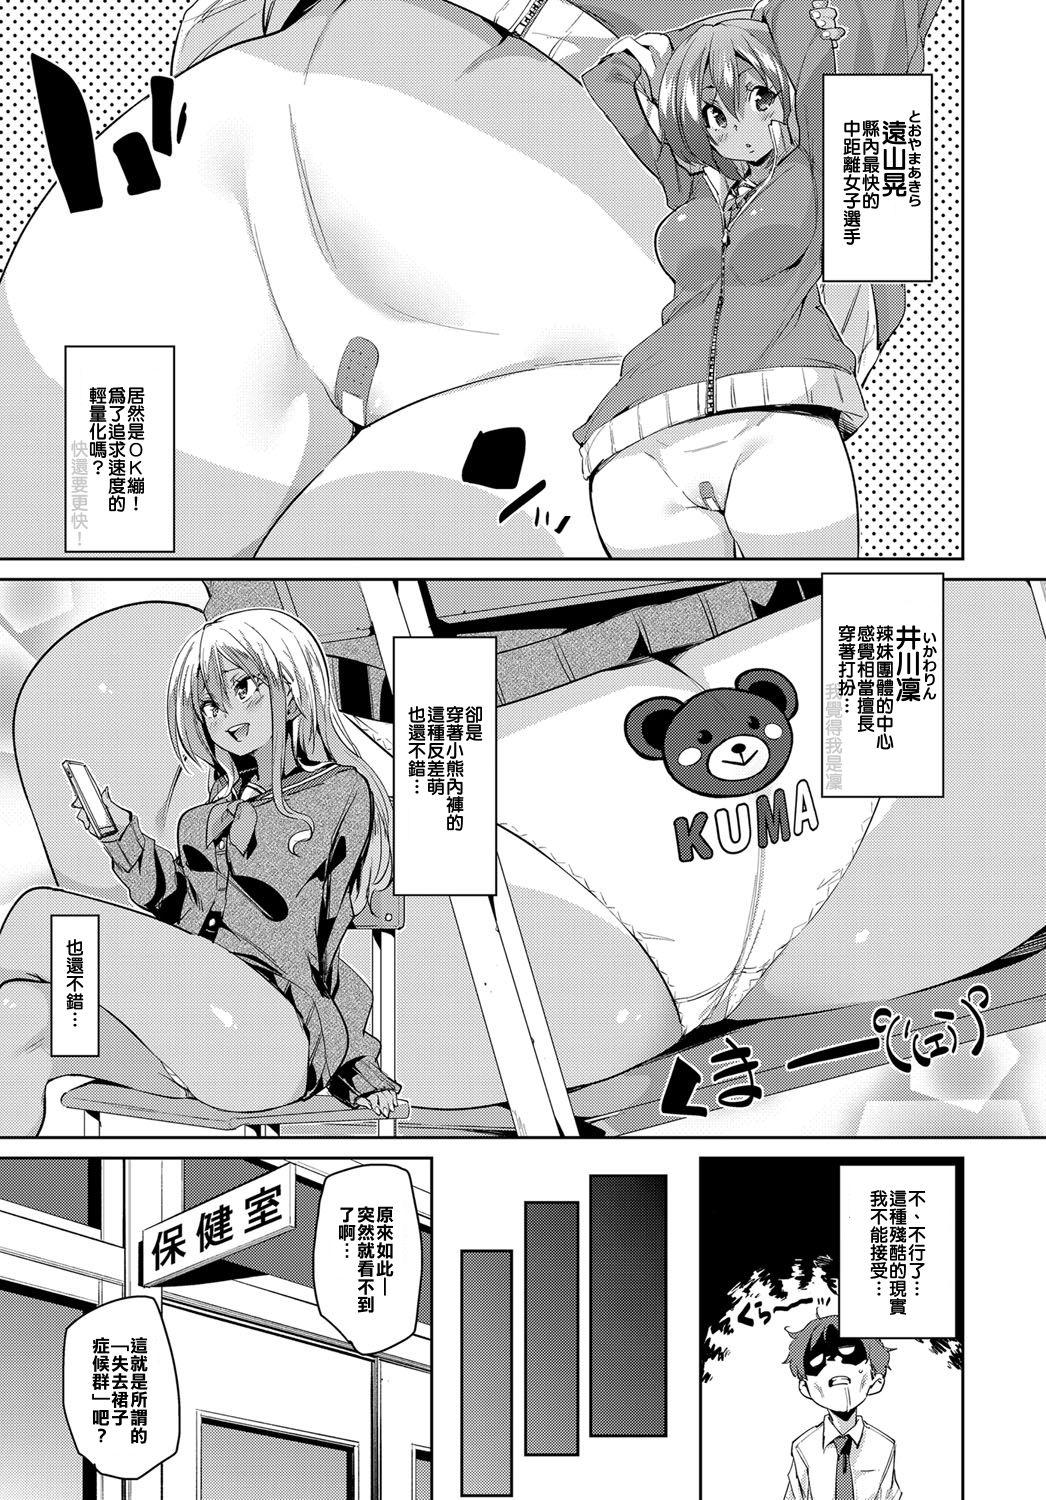 Leather Chiralism no Owari | Chiralism is End. Best Blow Job Ever - Page 3